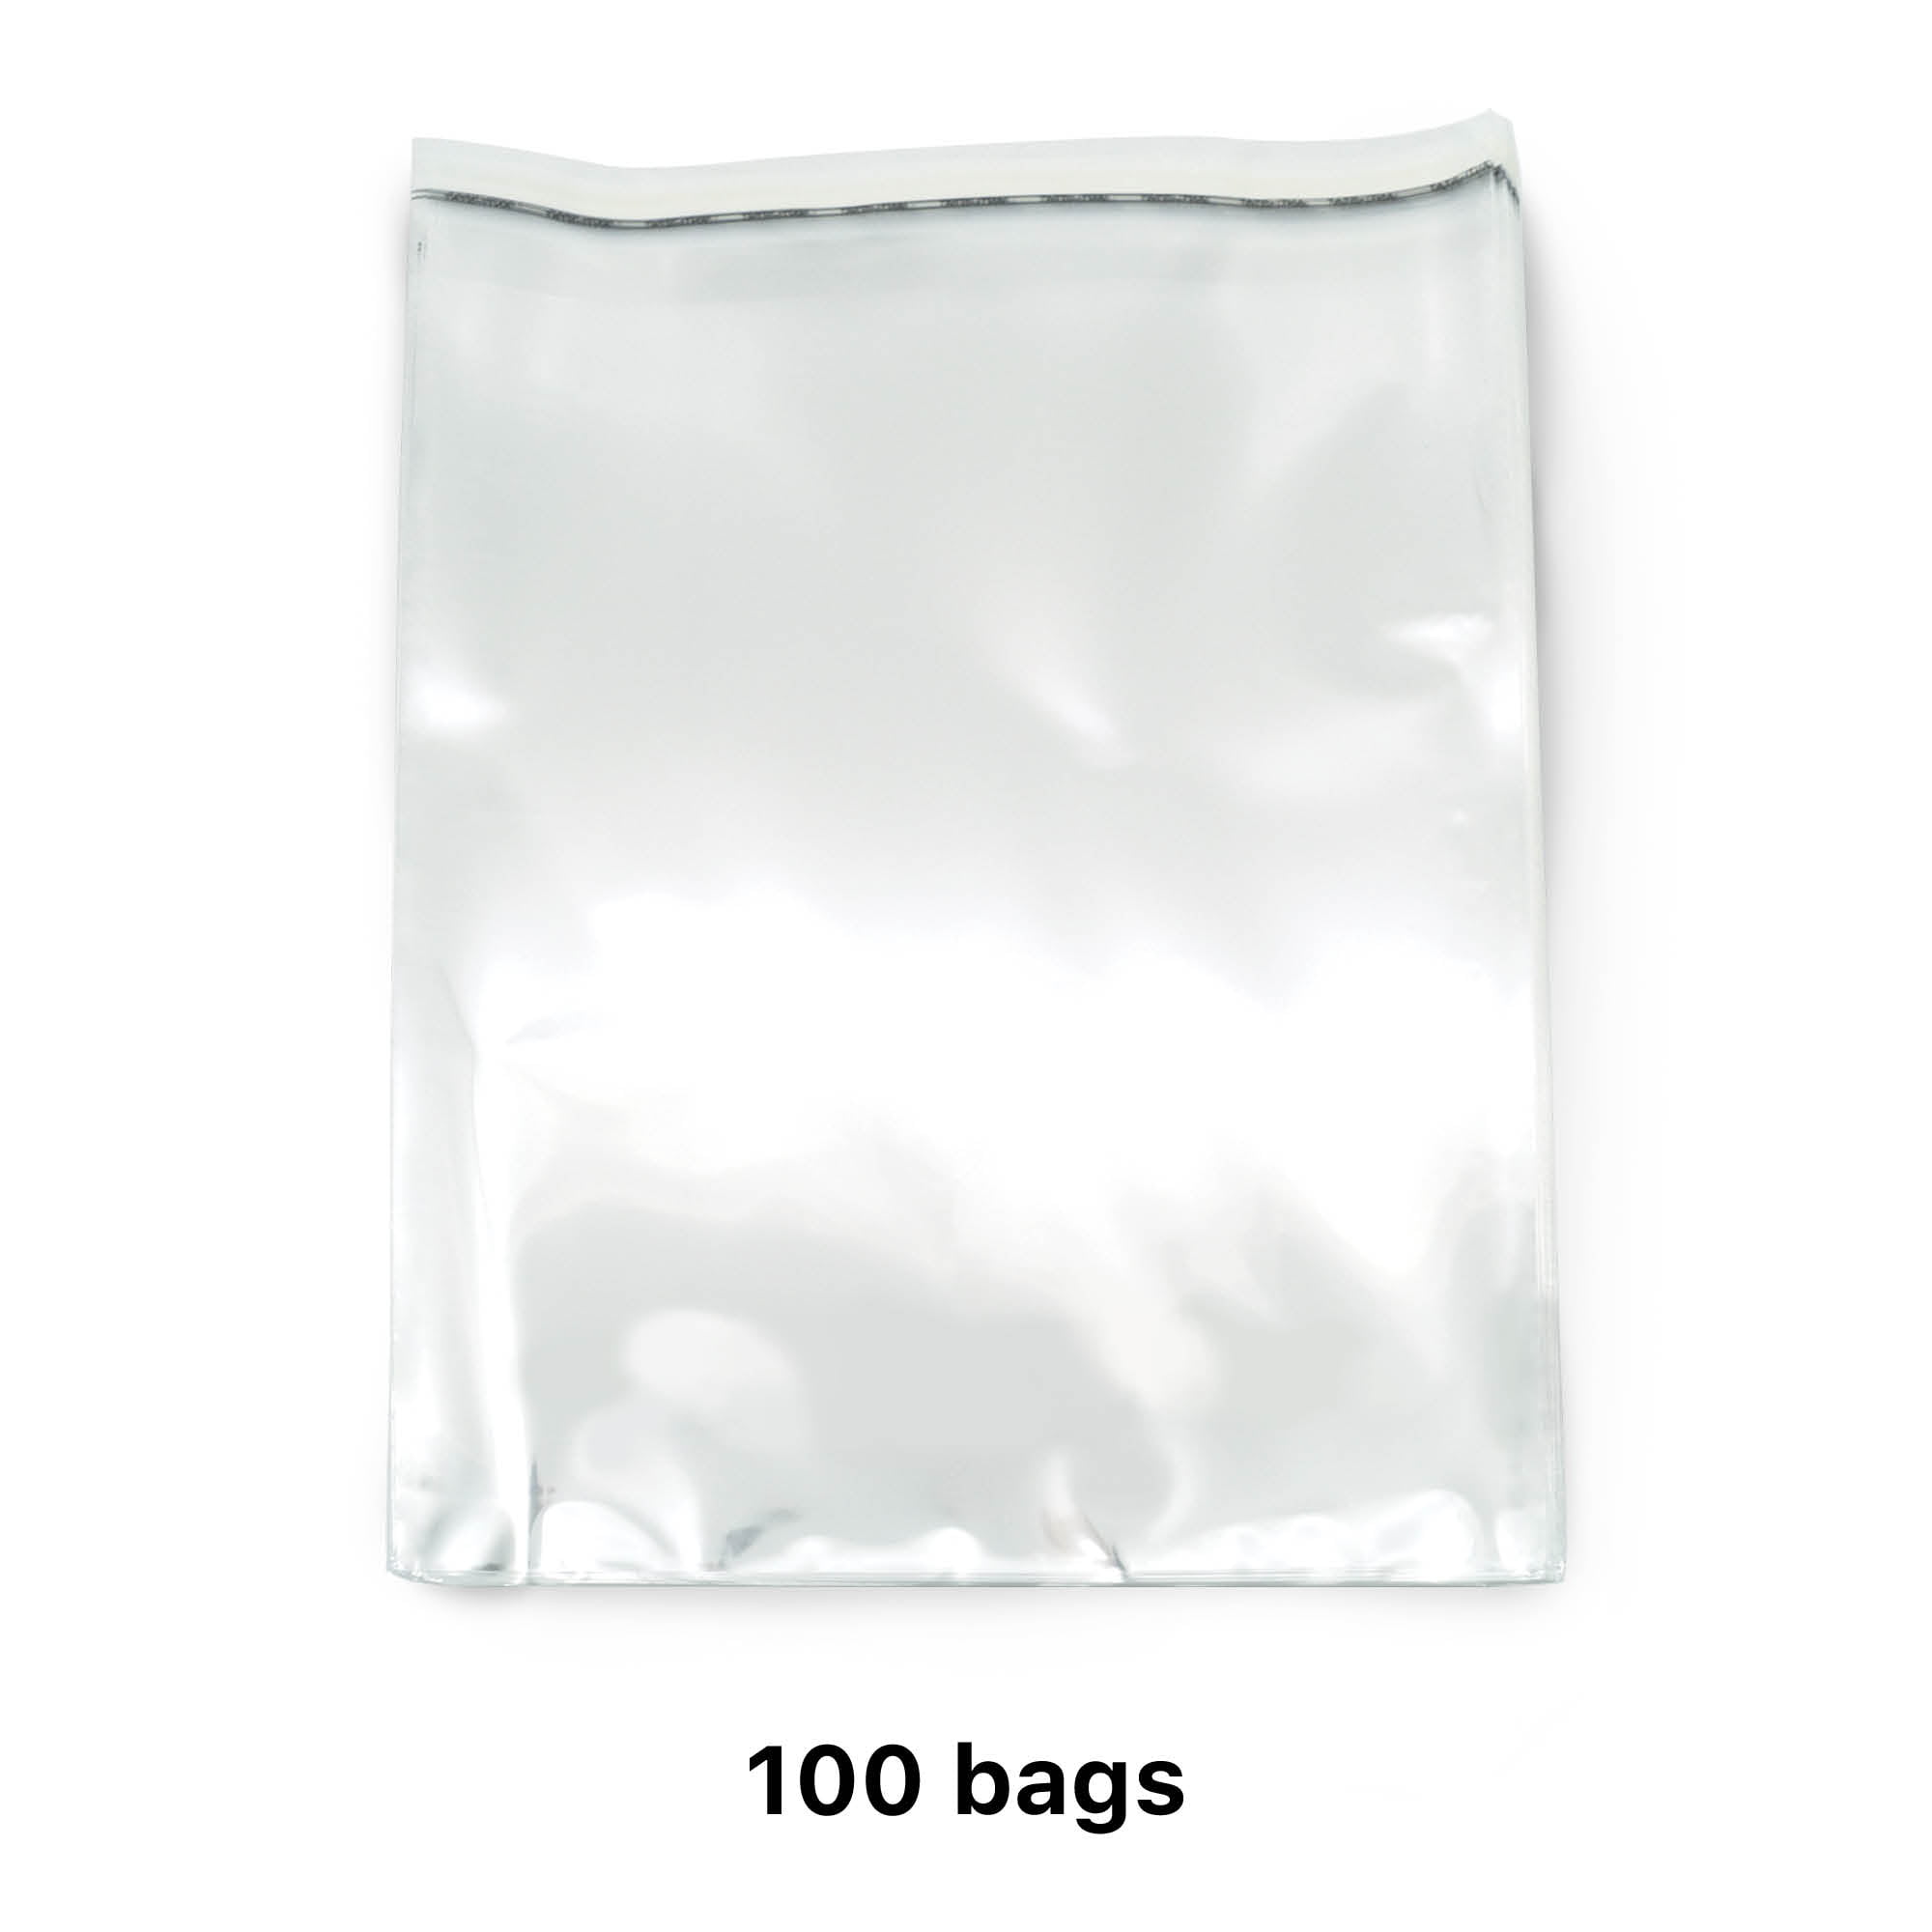 6 inch Clear Resealable Cello/Cellophane Bags with self seal lip Good for Bakery Candle Soap Cookie 4 50